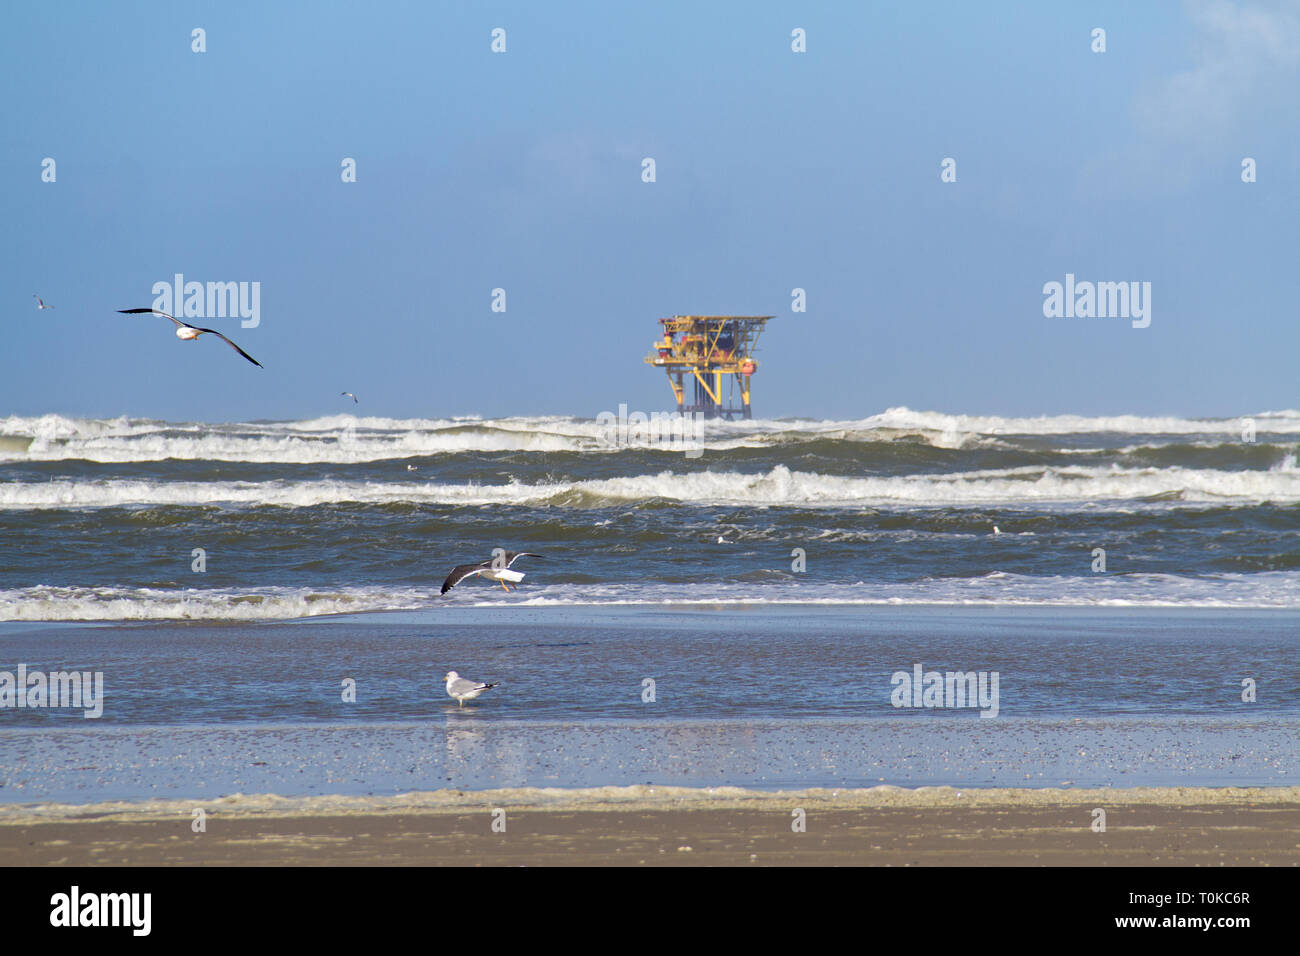 Offshore production platform near the Dutch island Ameland, beach, breaking waves and gulls in the foreground Stock Photo